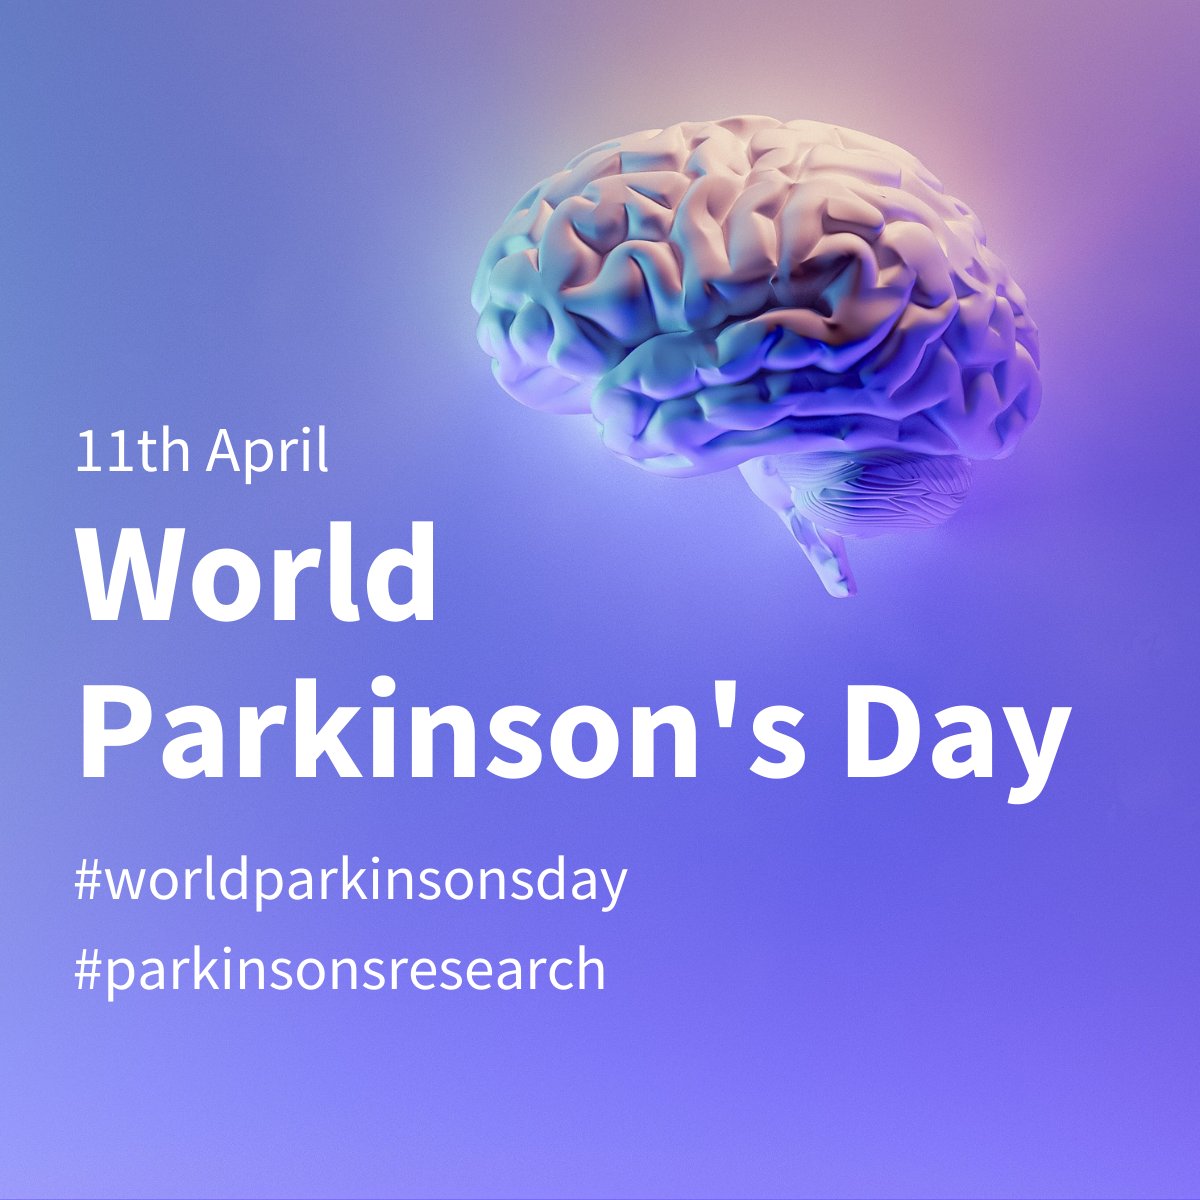 Today is #worldparkinsonsday🌍. We are celebrating the incredible #medicalresearch being carried out across the globe that is working towards finding a cure and helping to improve the quality of life for those living with Parkinson's.

#parkinsonsresearch #parkinsonsawareness